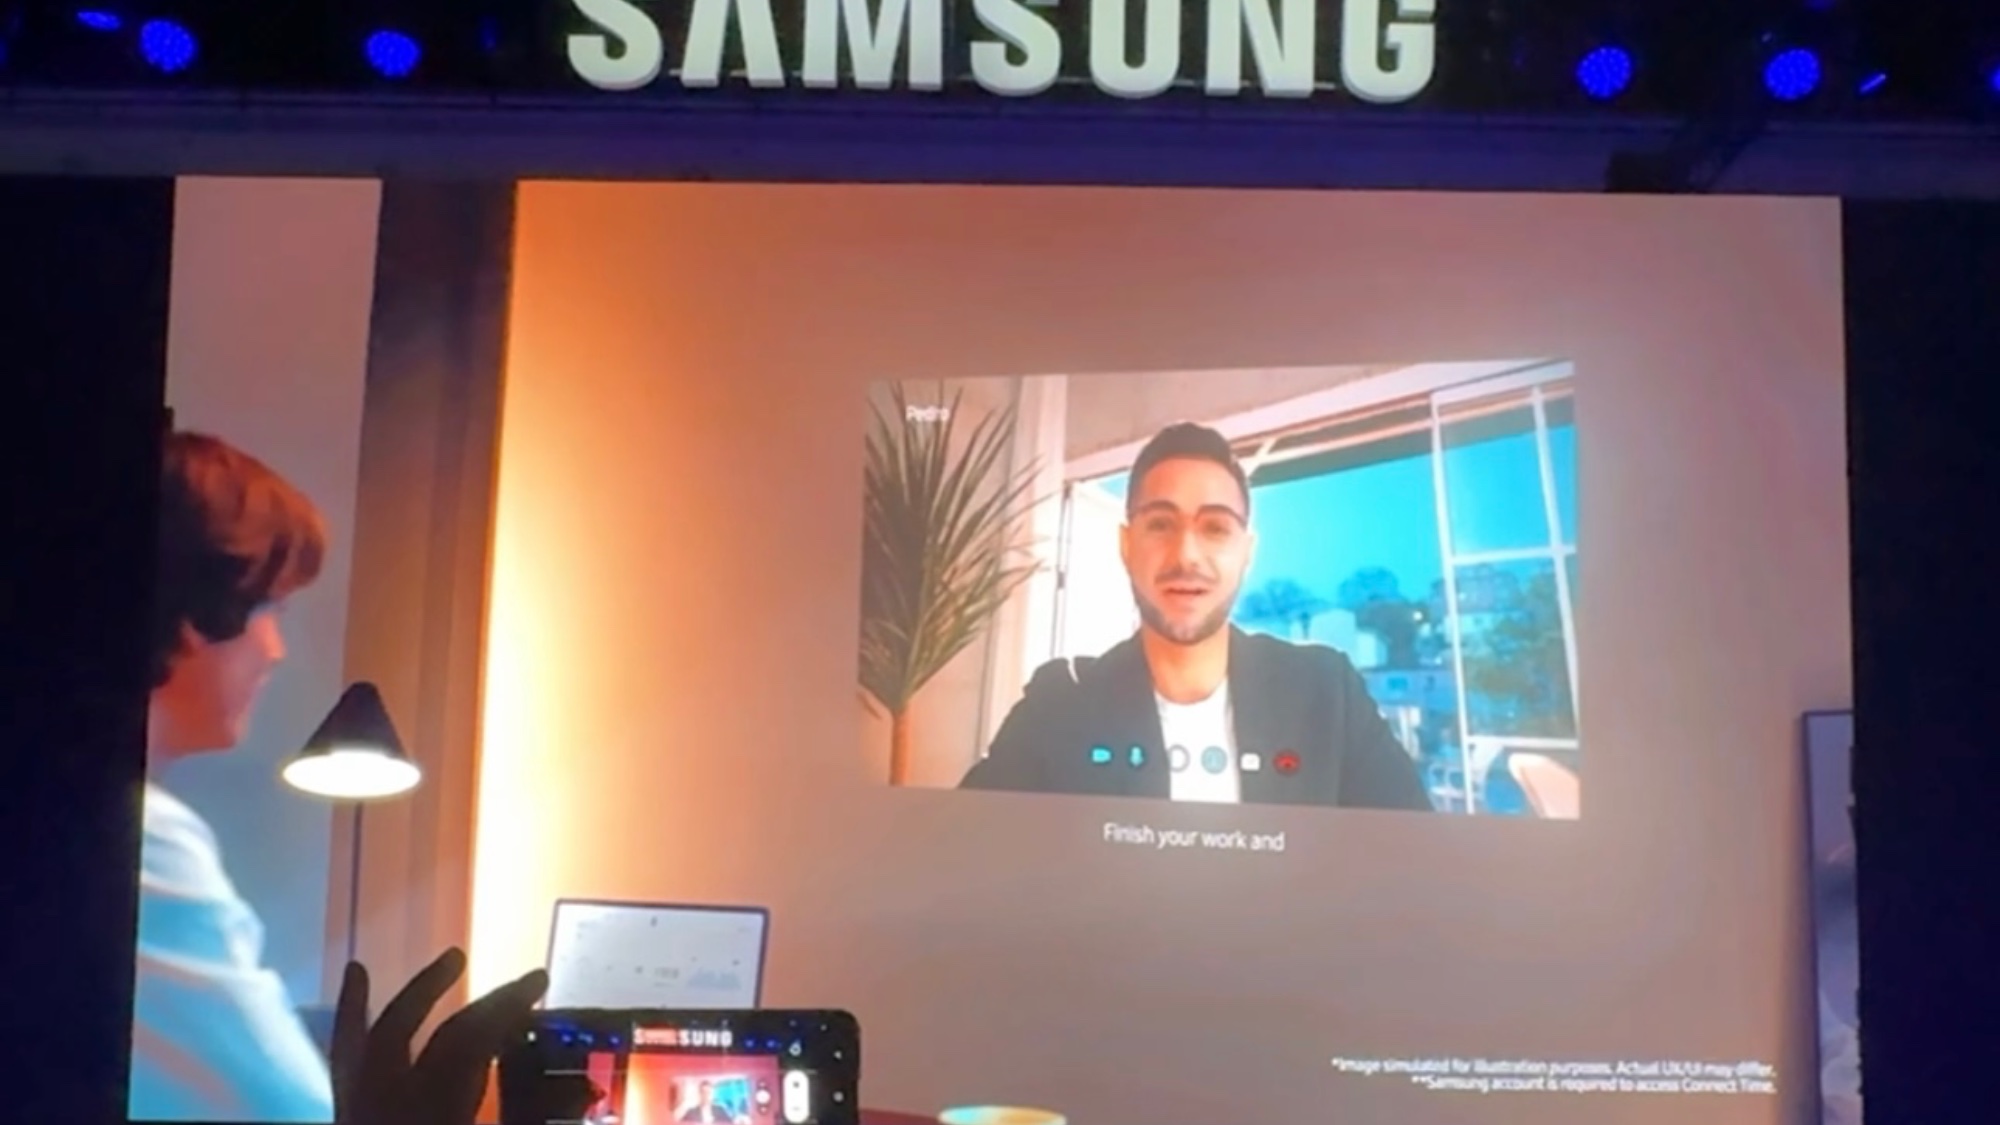 Samsung Ballie video call projection